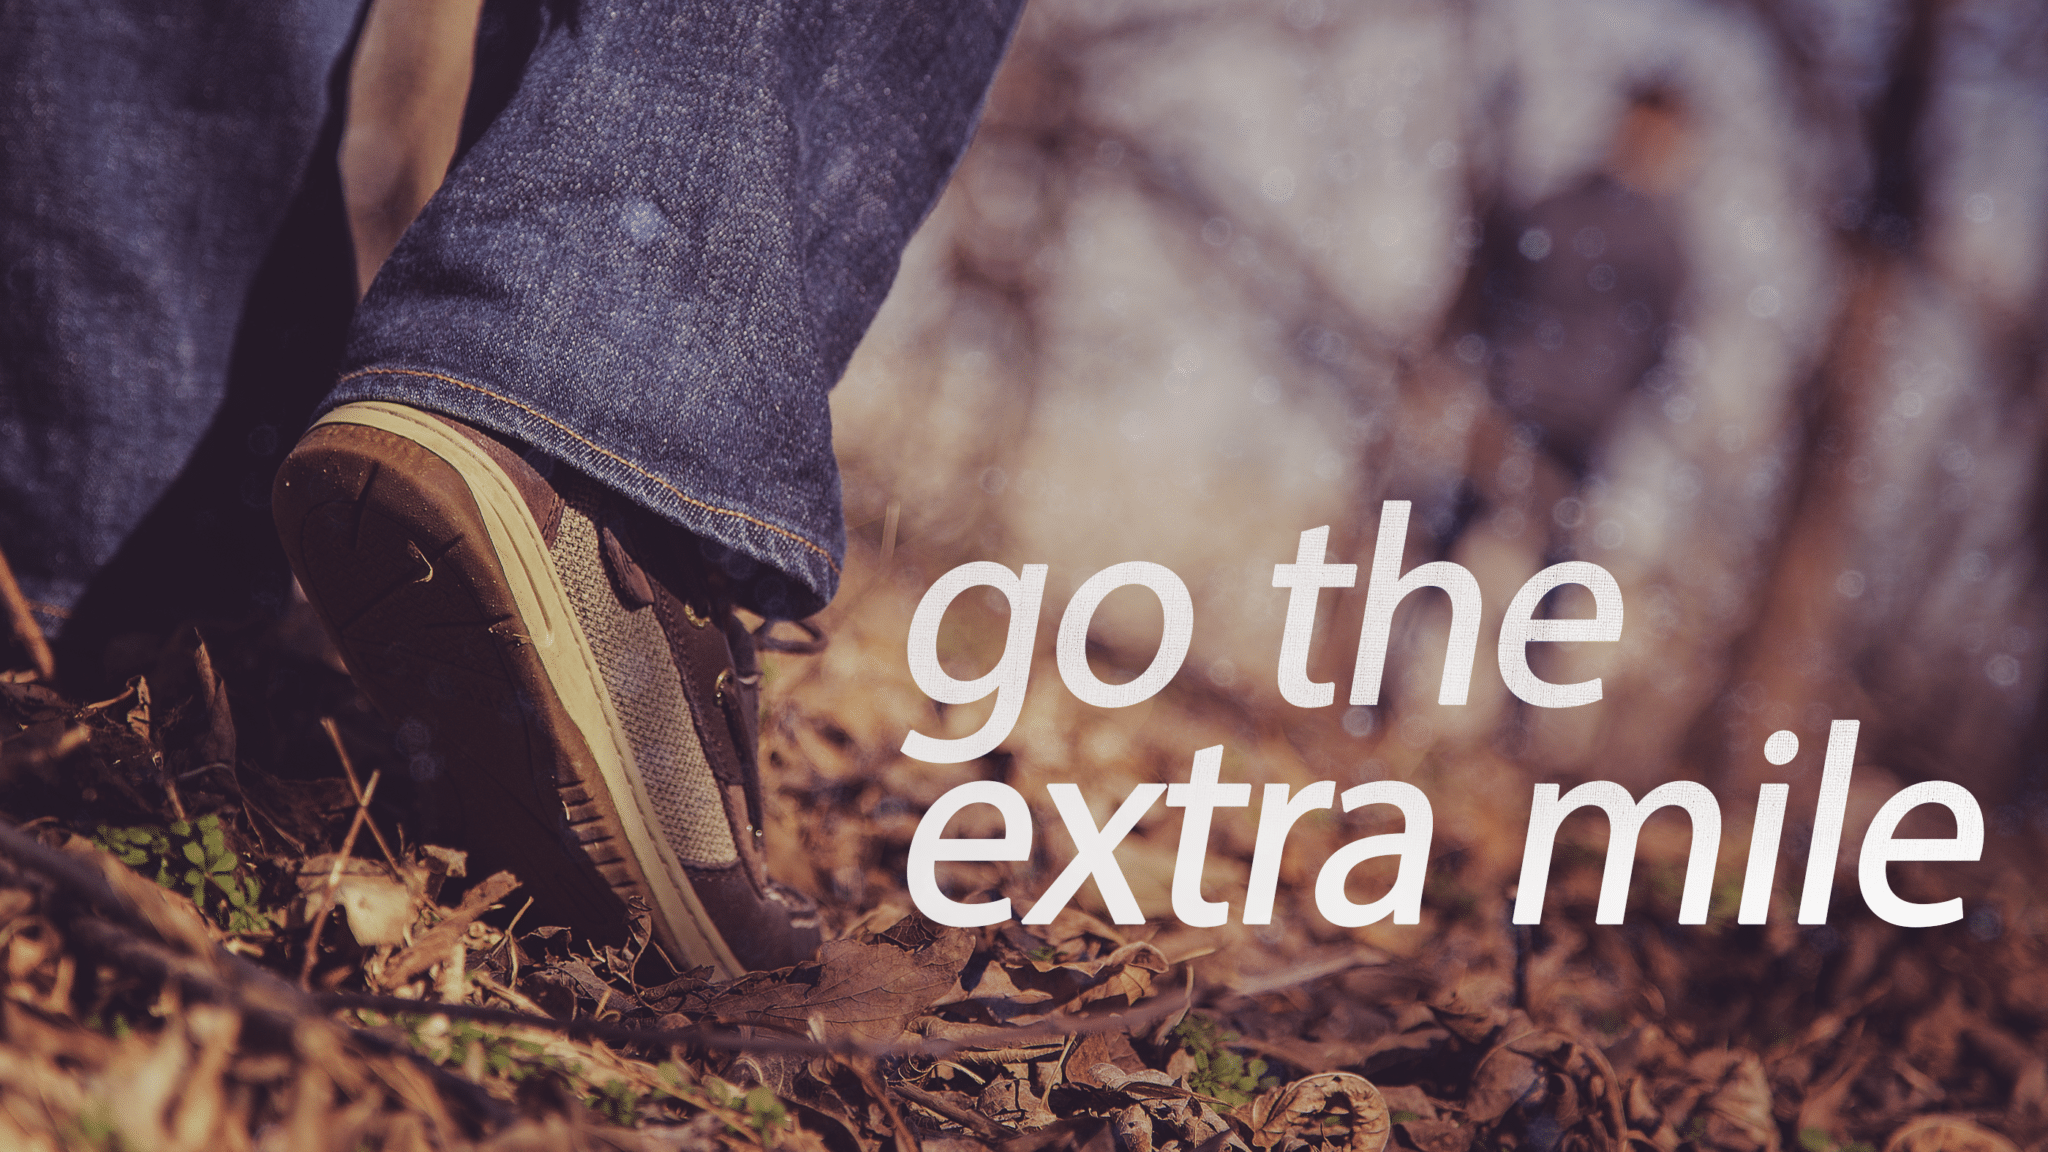 Go the Extra Mile